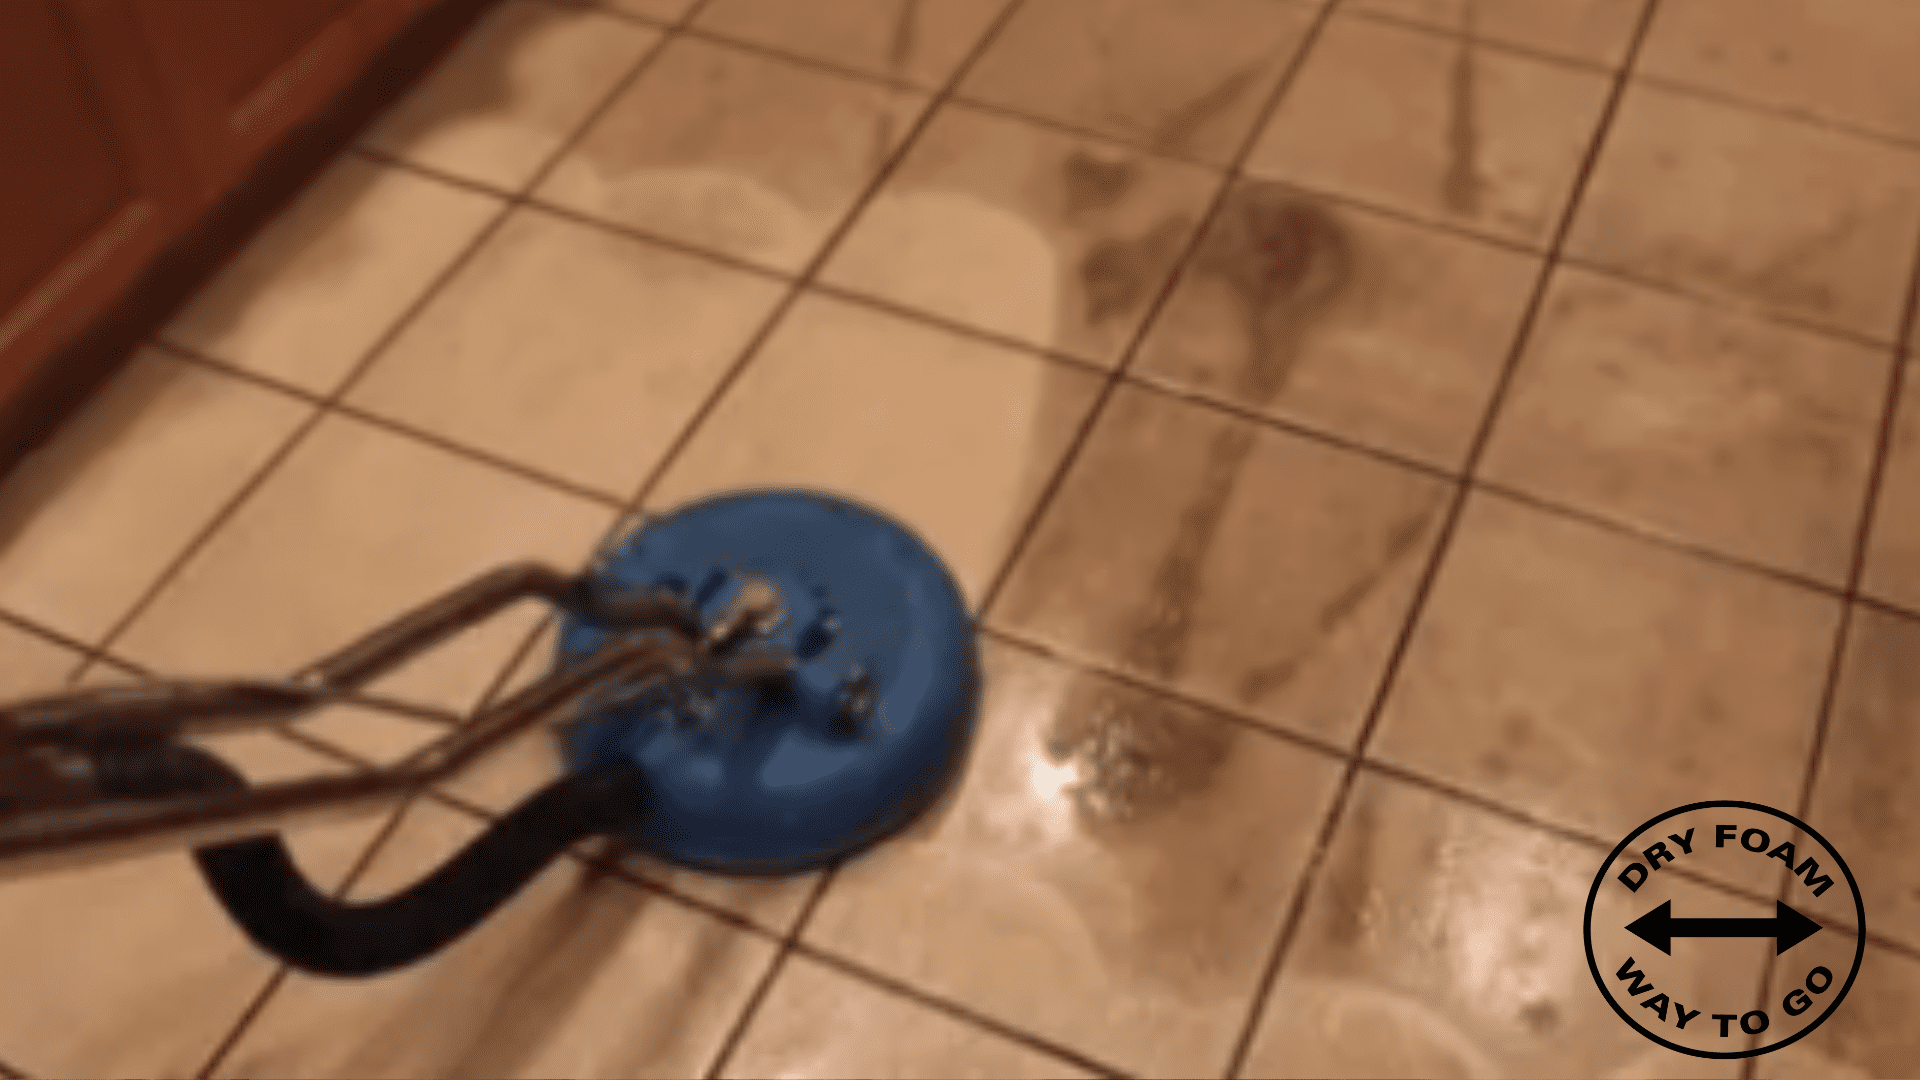 A blue mop is on the floor of a tiled room.